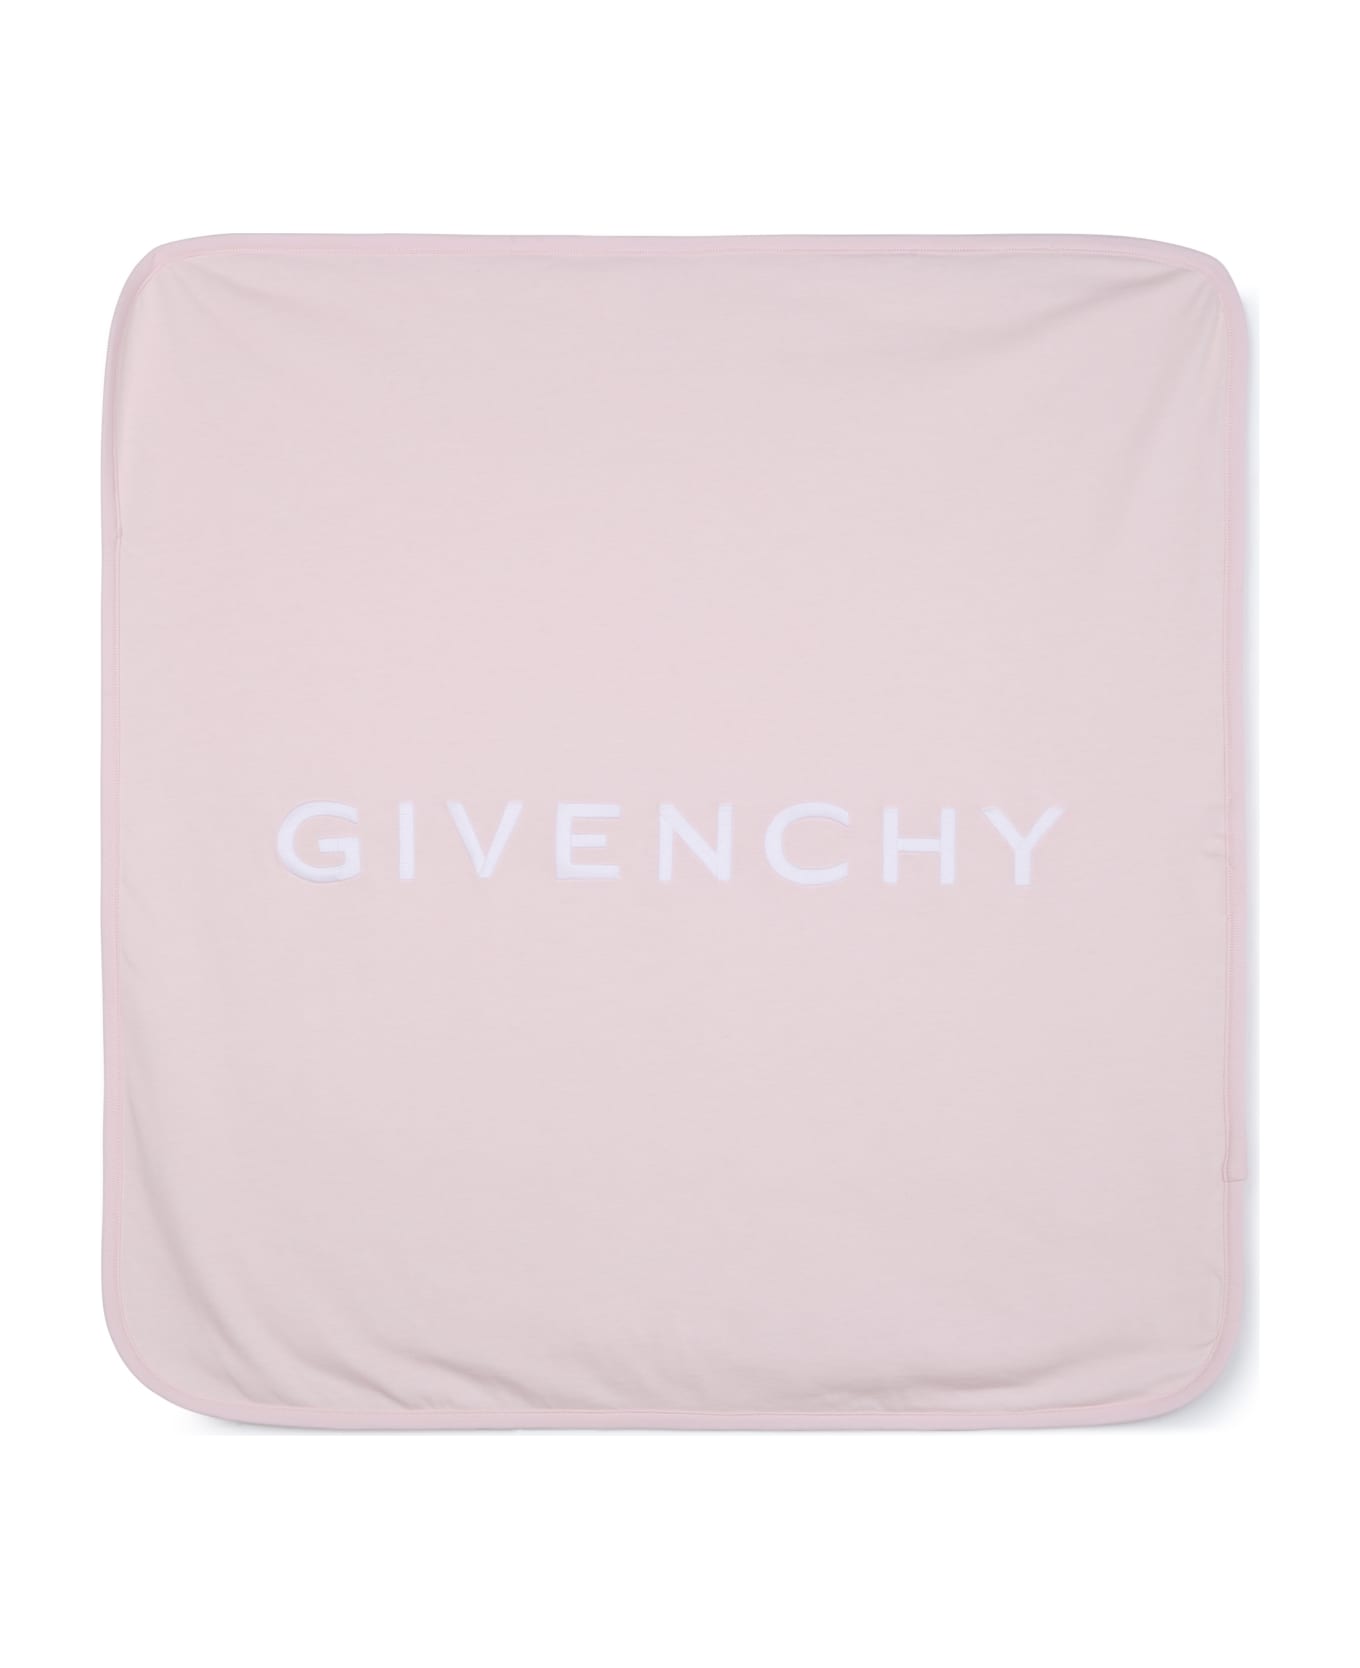 Givenchy Blanket With Print - Pink アクセサリー＆ギフト